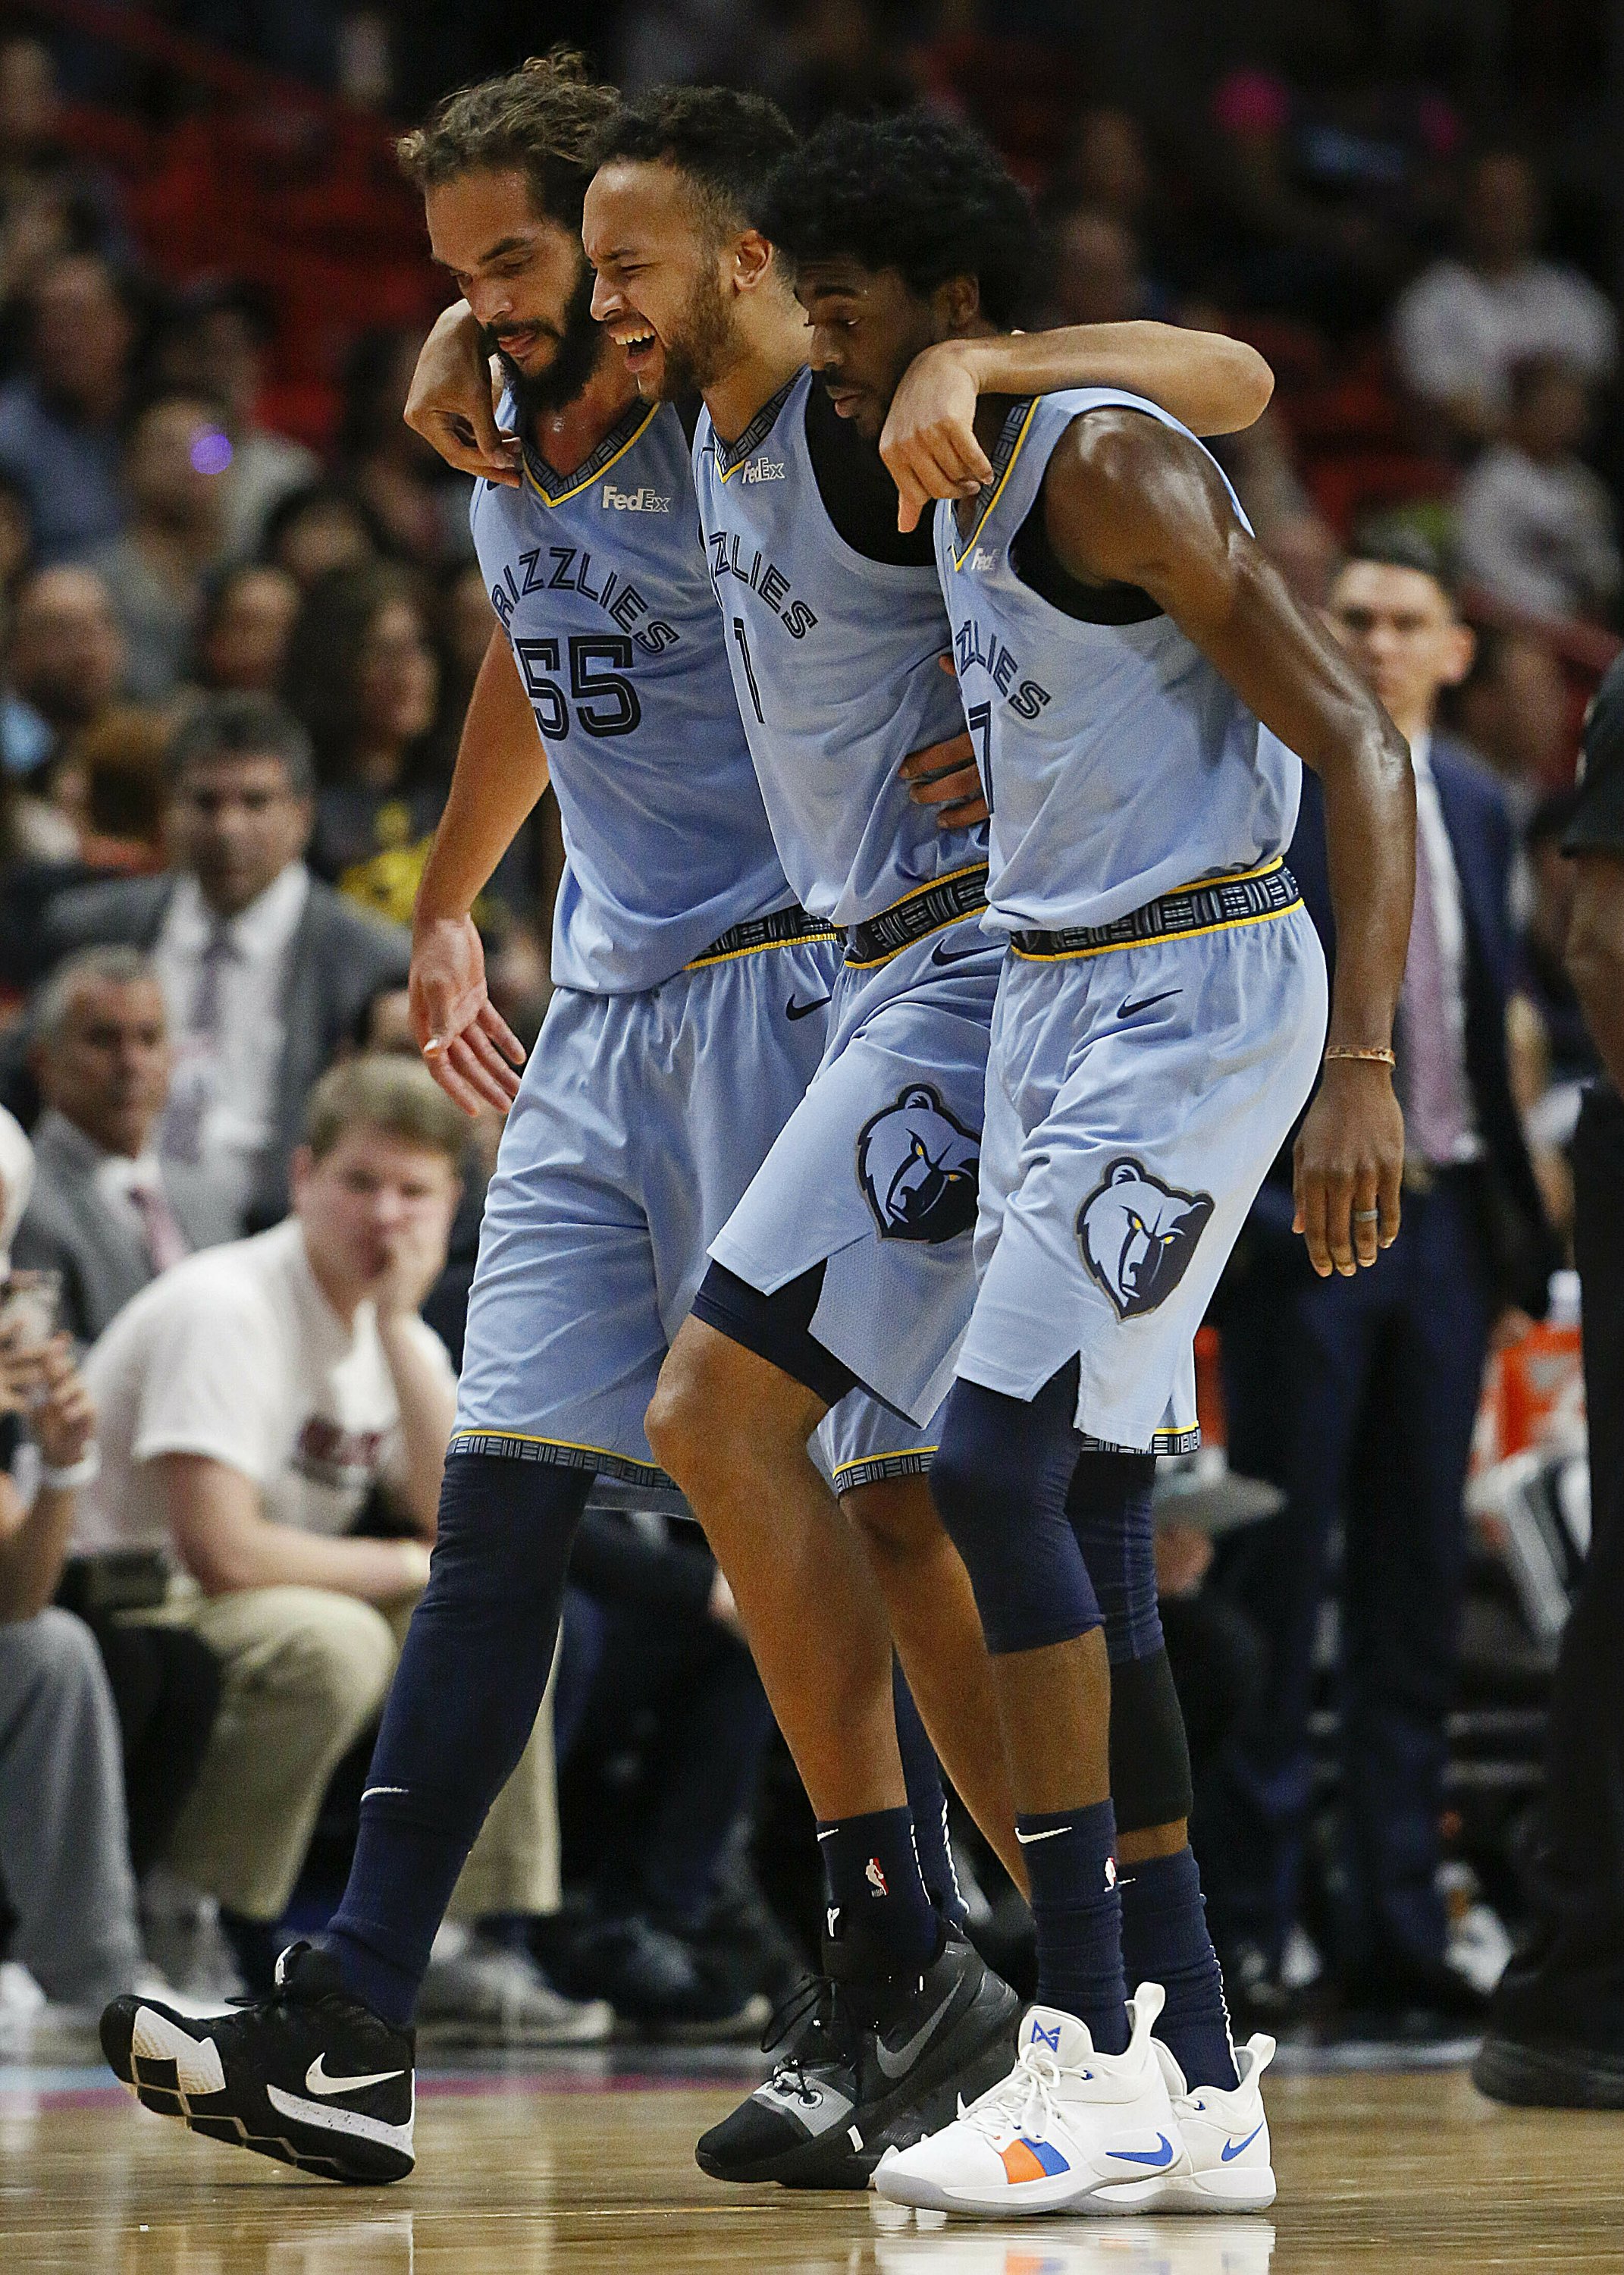 Grizzlies' Kyle Anderson to miss at least 2-4 weeks